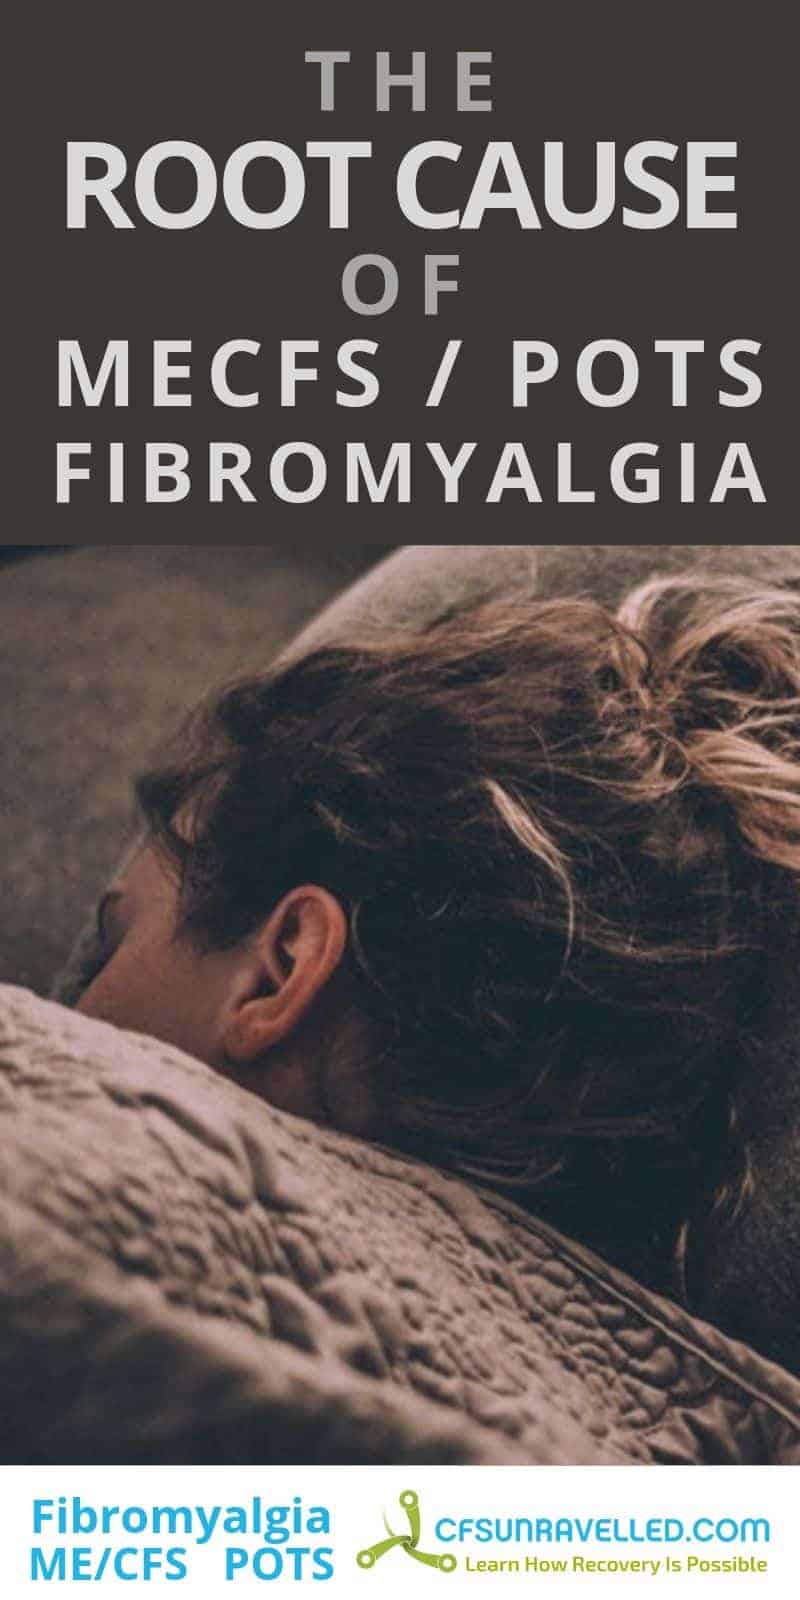 woman looking down with headline about the root cause of fibromyalgia and ME/CFS and POTS